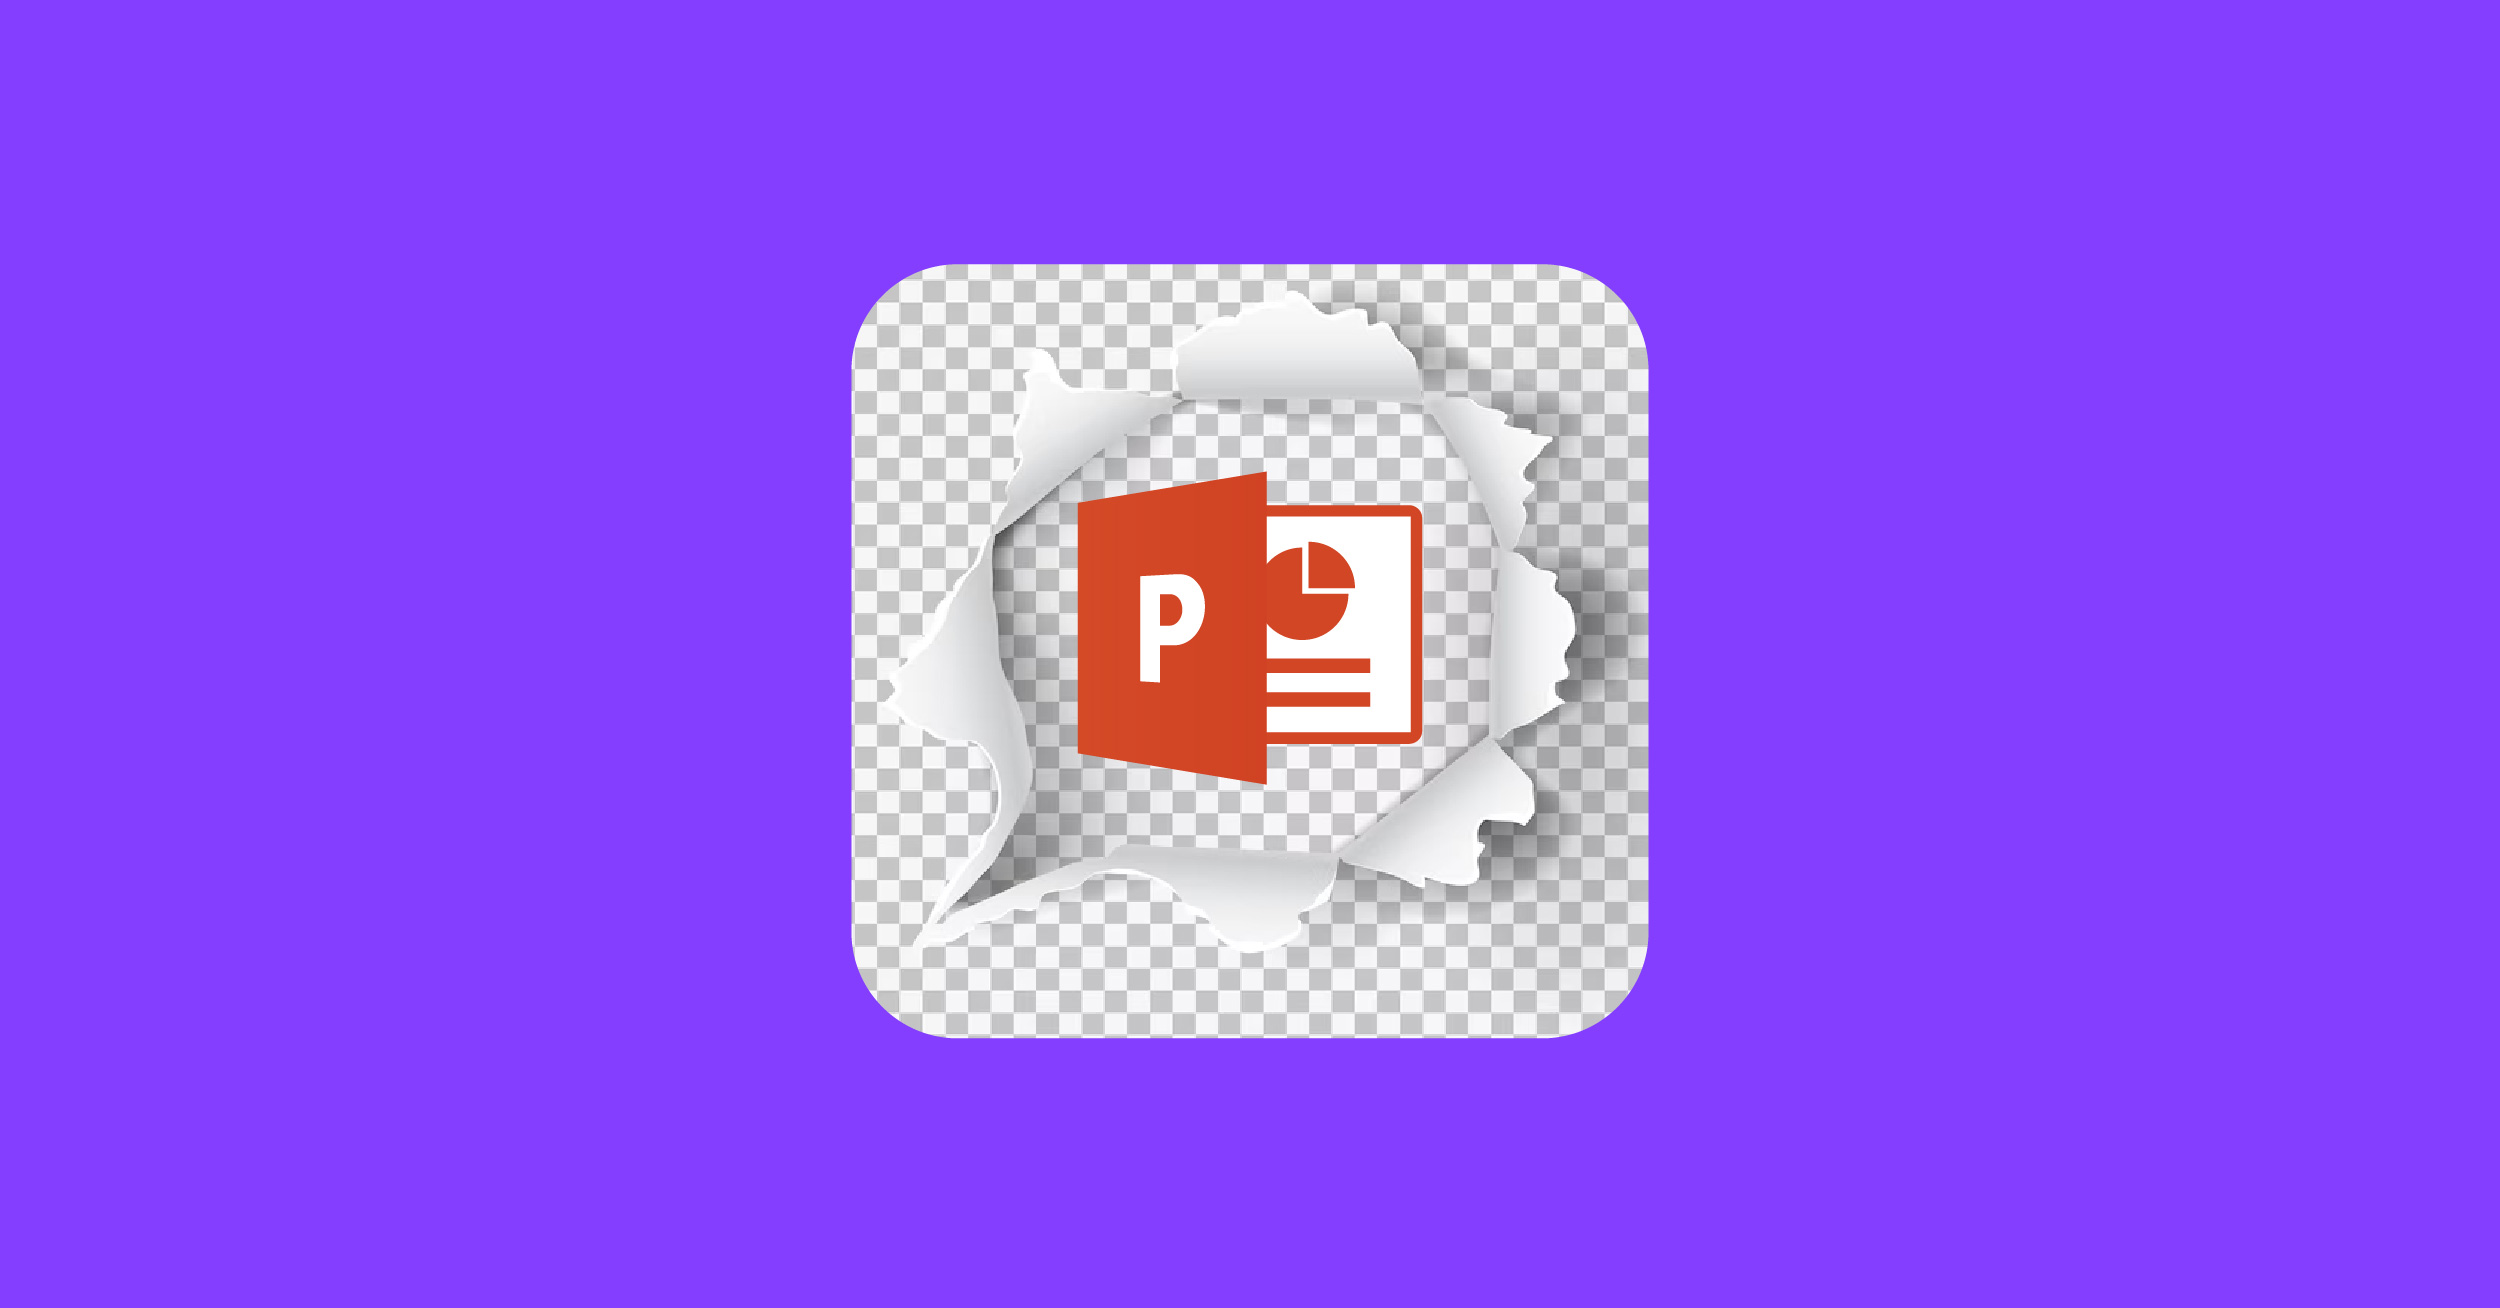 How to Remove the Background of an Image in PowerPoint